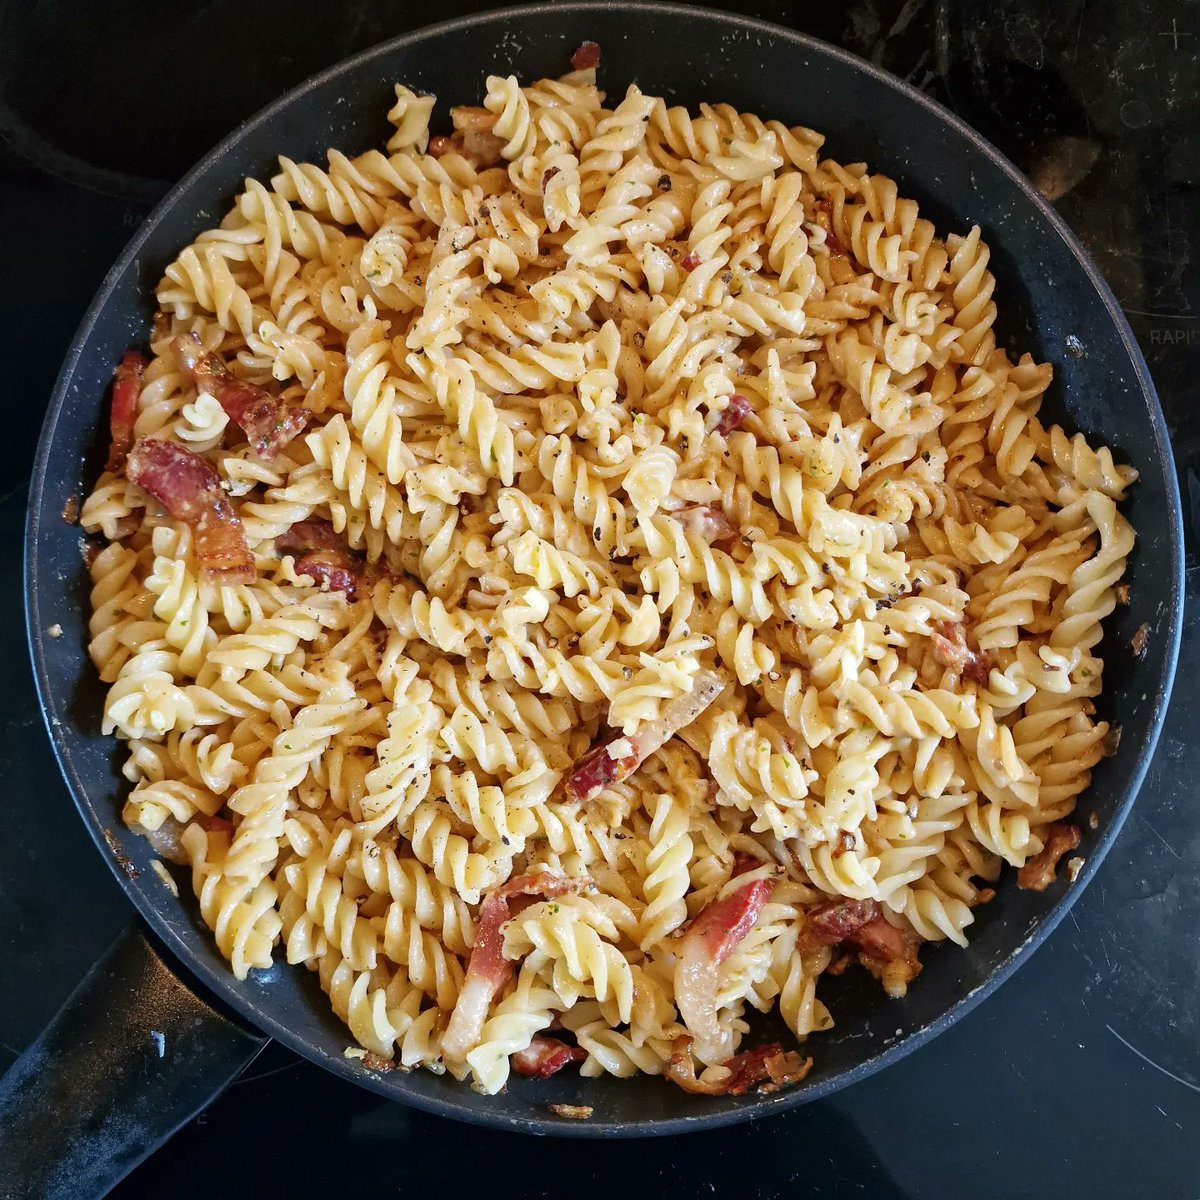 I've been told I need to make sure i have lunch more often instead of working through & not stopping. Tynefield Tamworth lardon pasta is on the menu today. Quick, easy & full of flavour! #farming